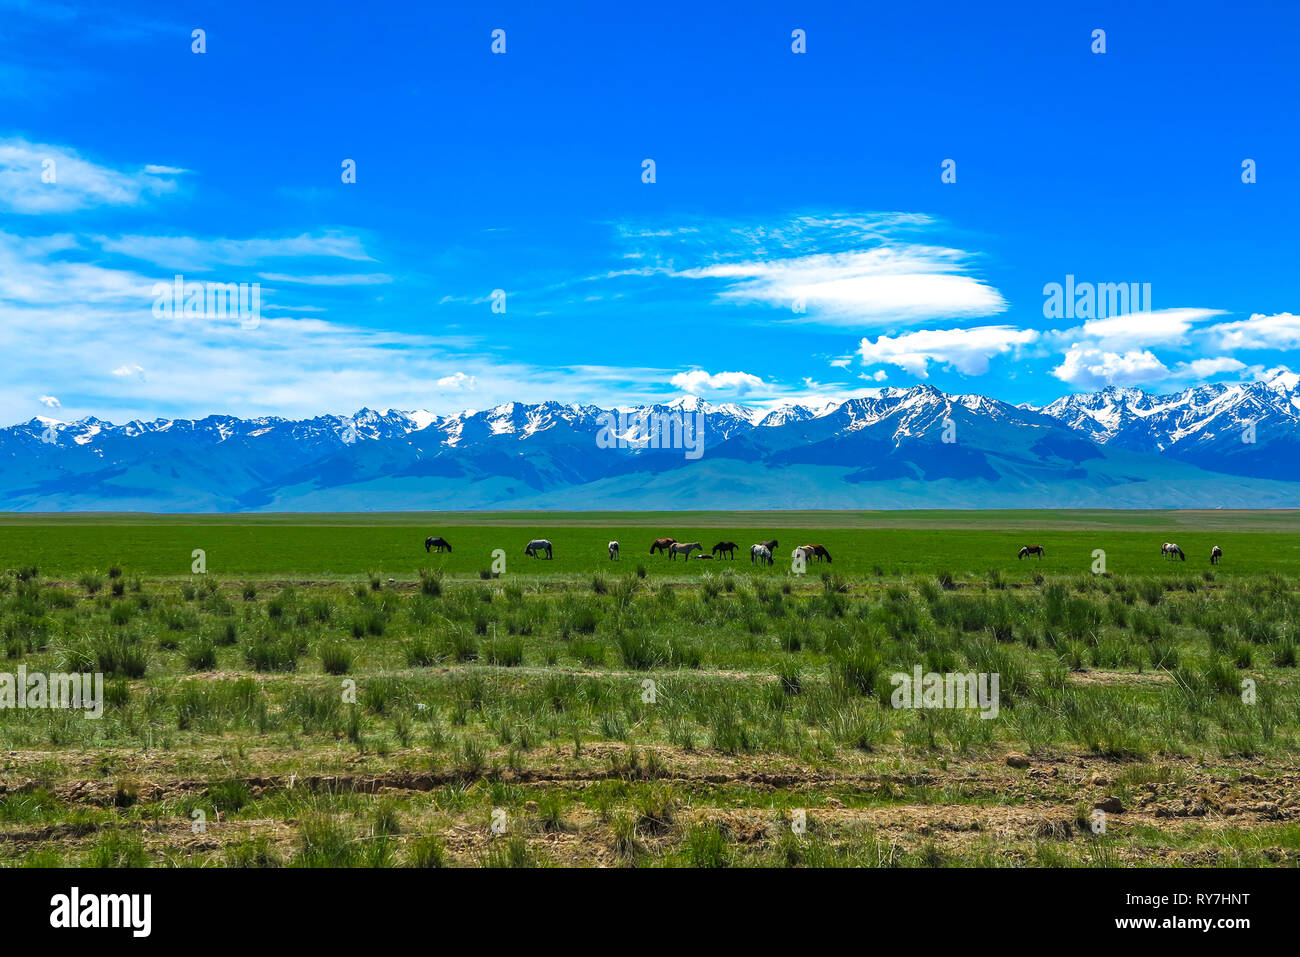 At Bashy Too Snow Capped Mountain Range Peaks and Grass Land Valley Landscape with Grazing Horses Stock Photo